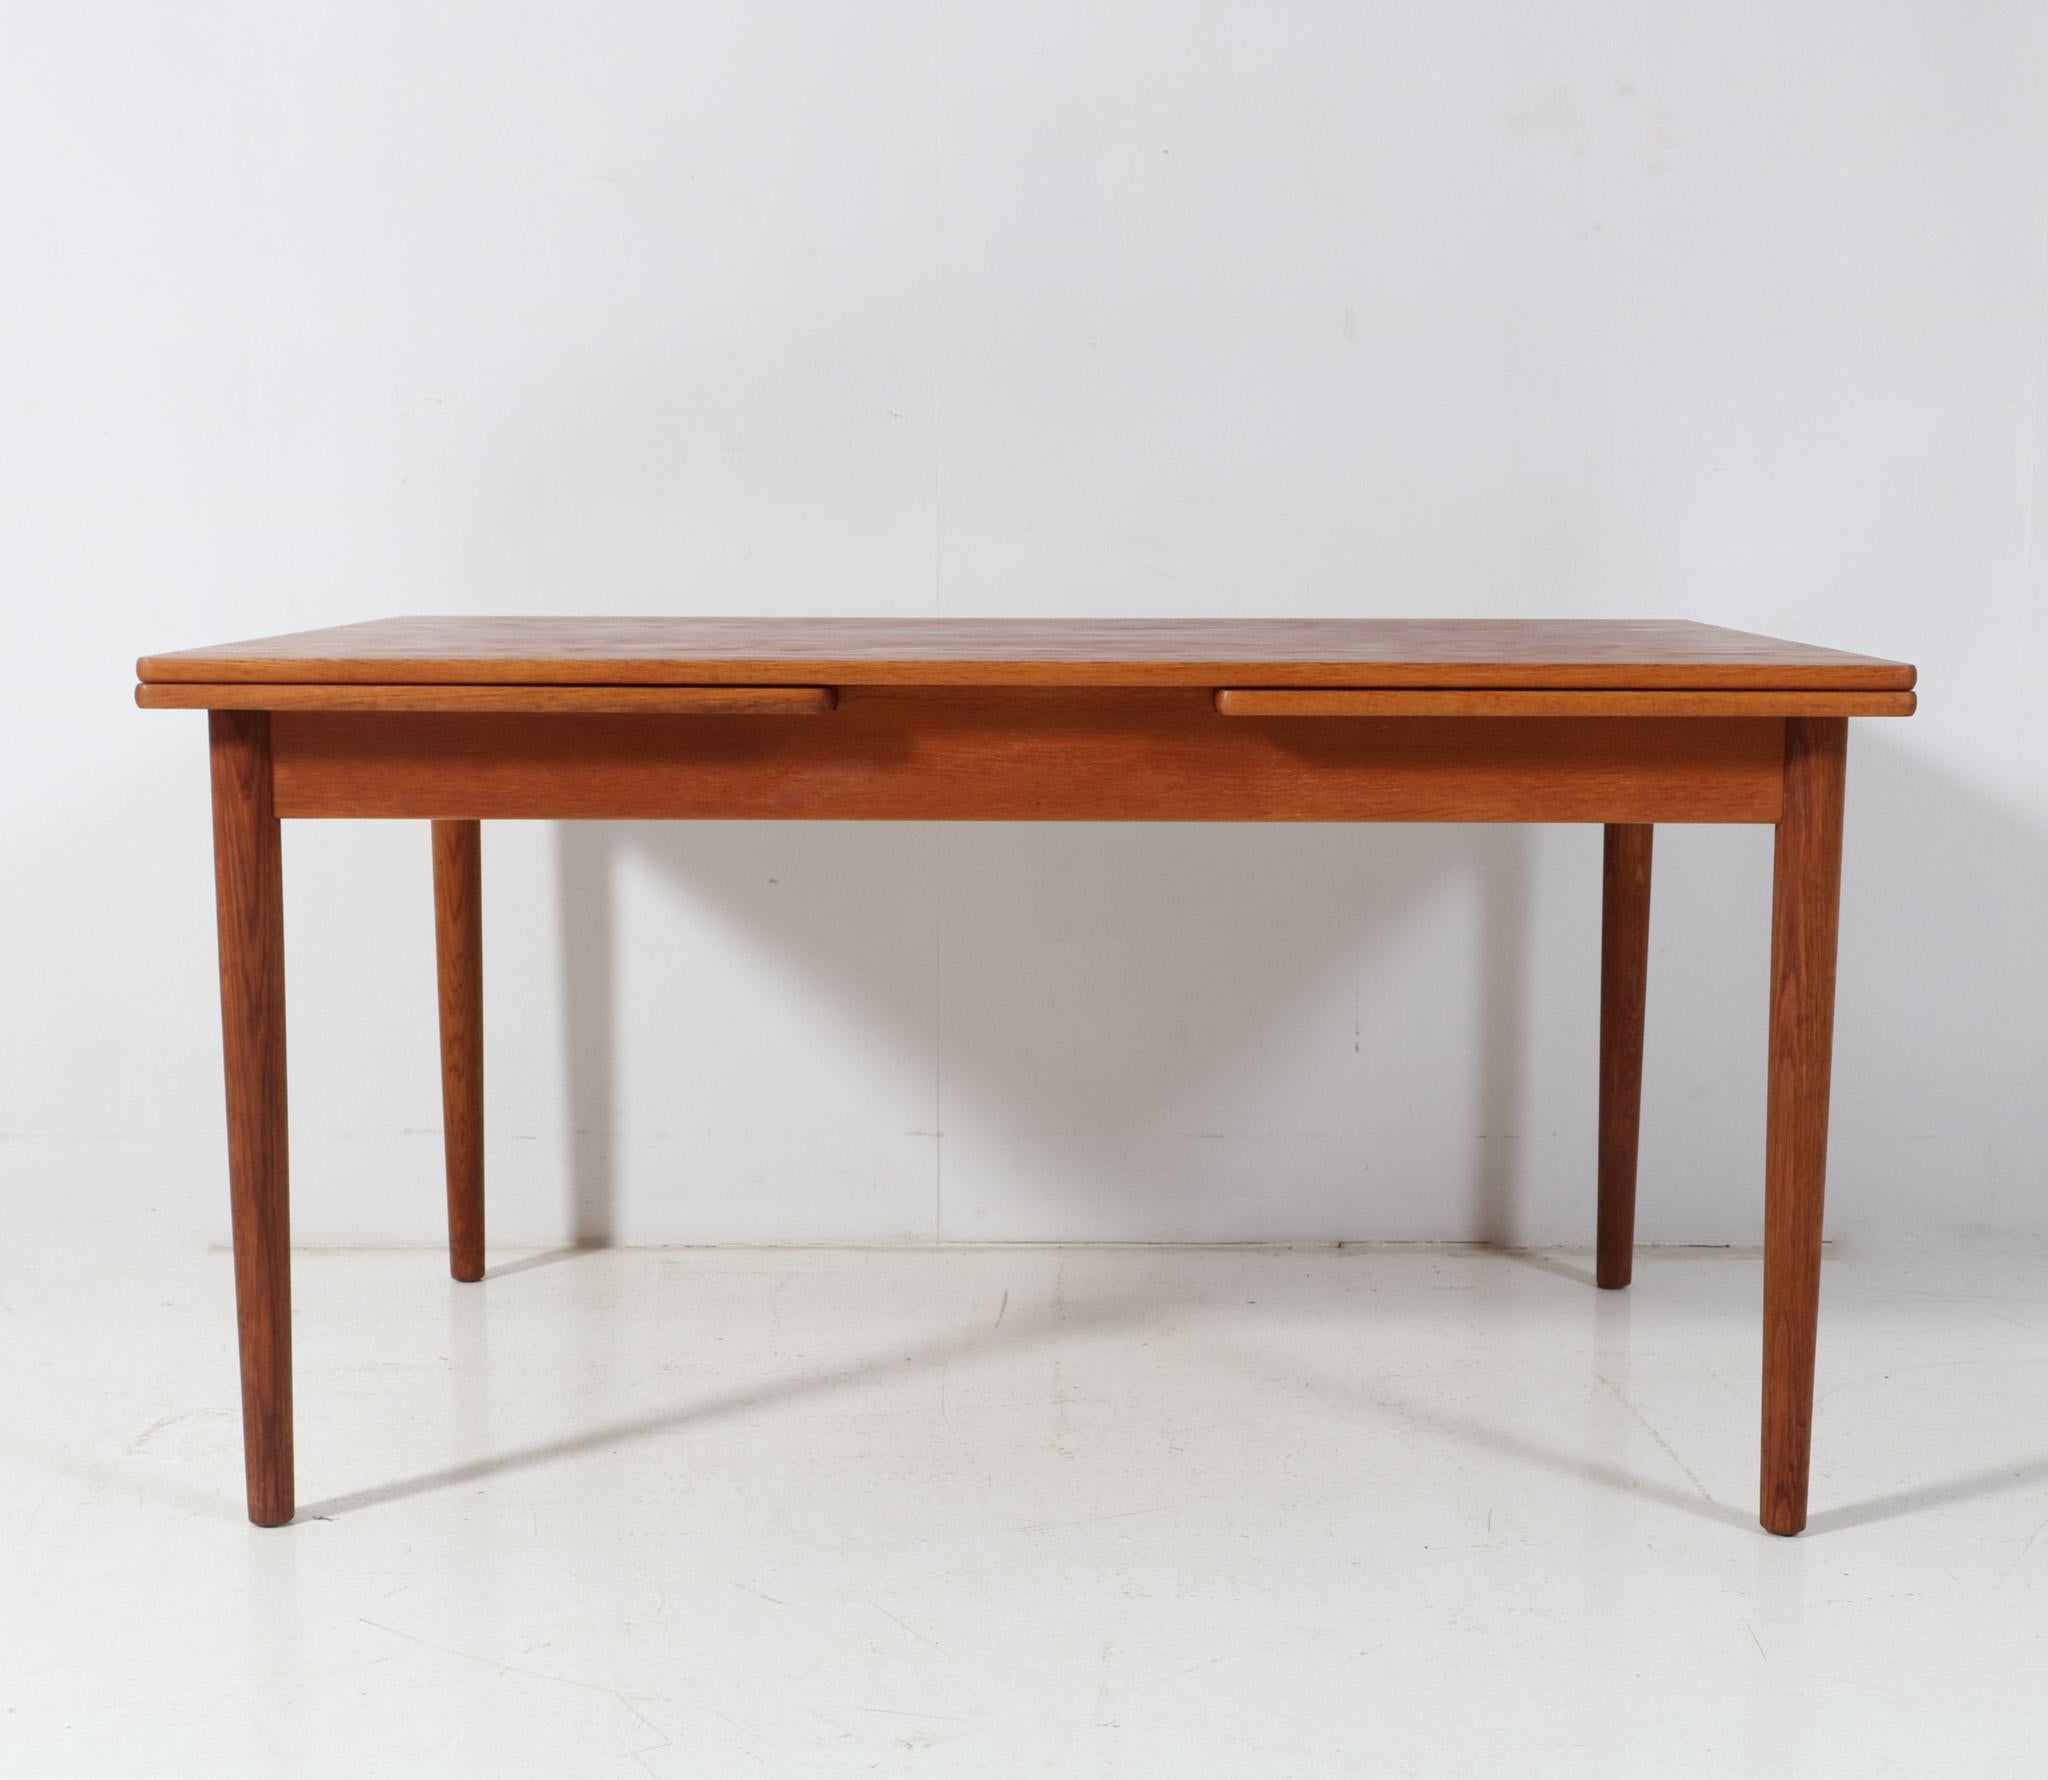 Danish  Mid-Century Modern Teak Extendable Dining Room Table Mo. 215 by Farstrup, 1960s For Sale